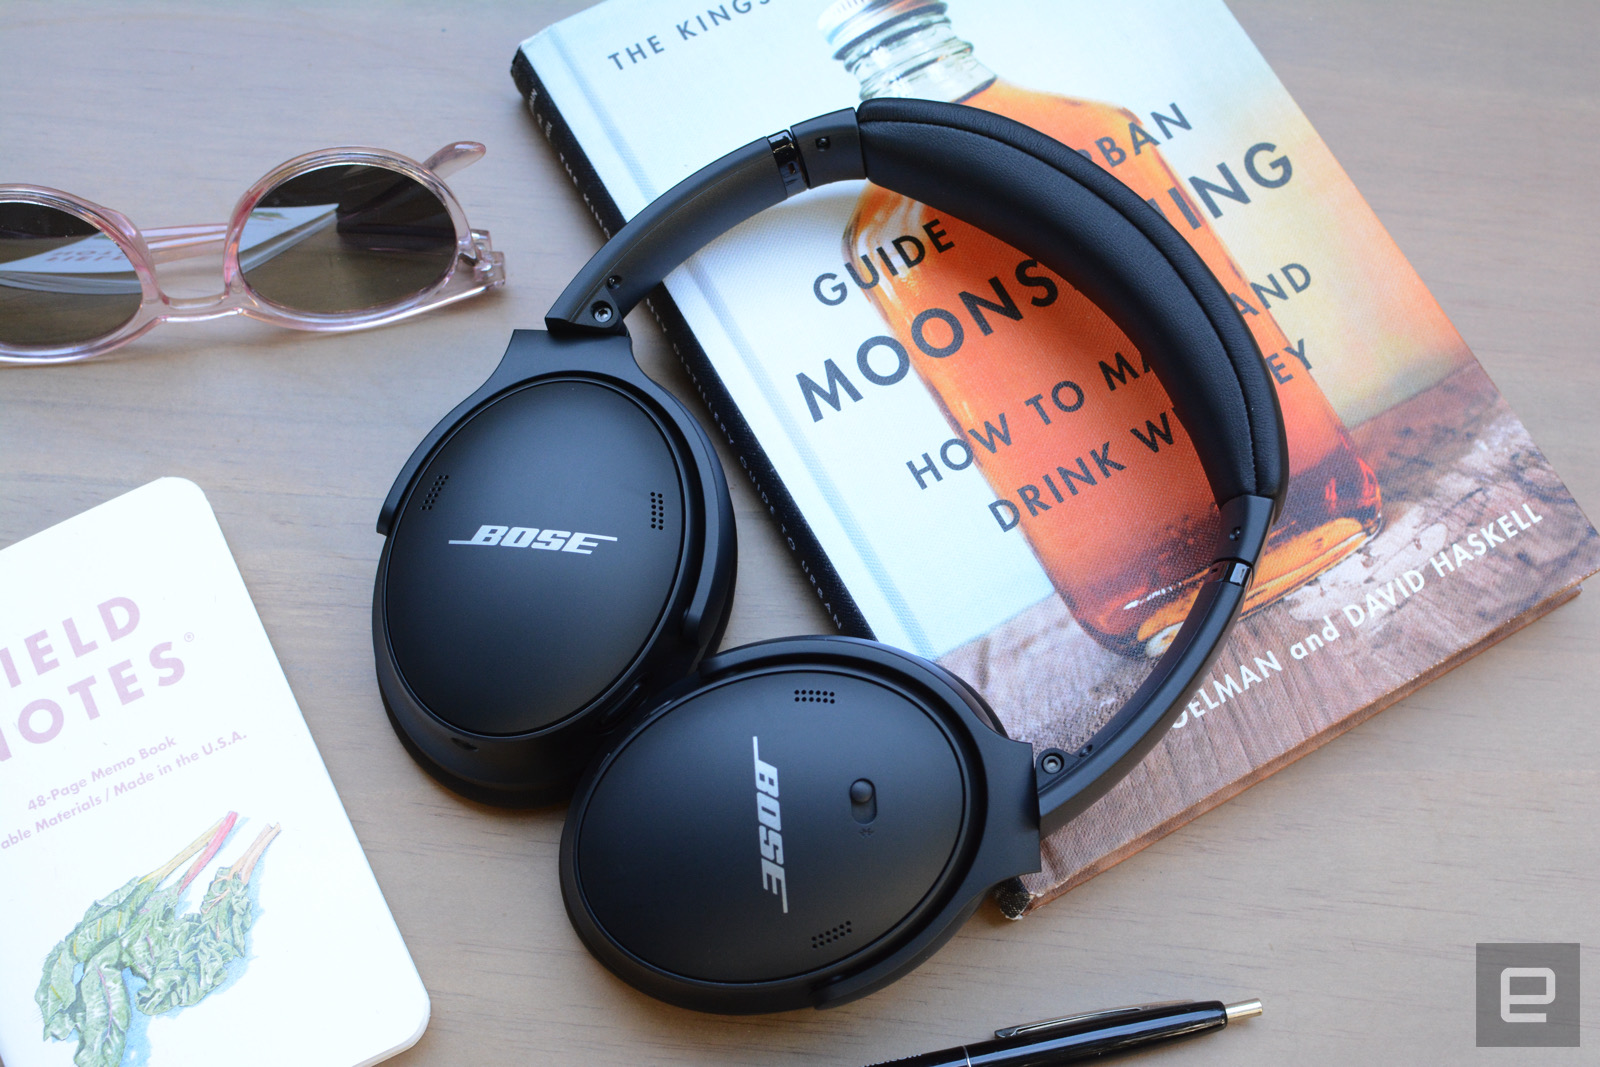 Bose is reportedly laying off staff amid poor sales